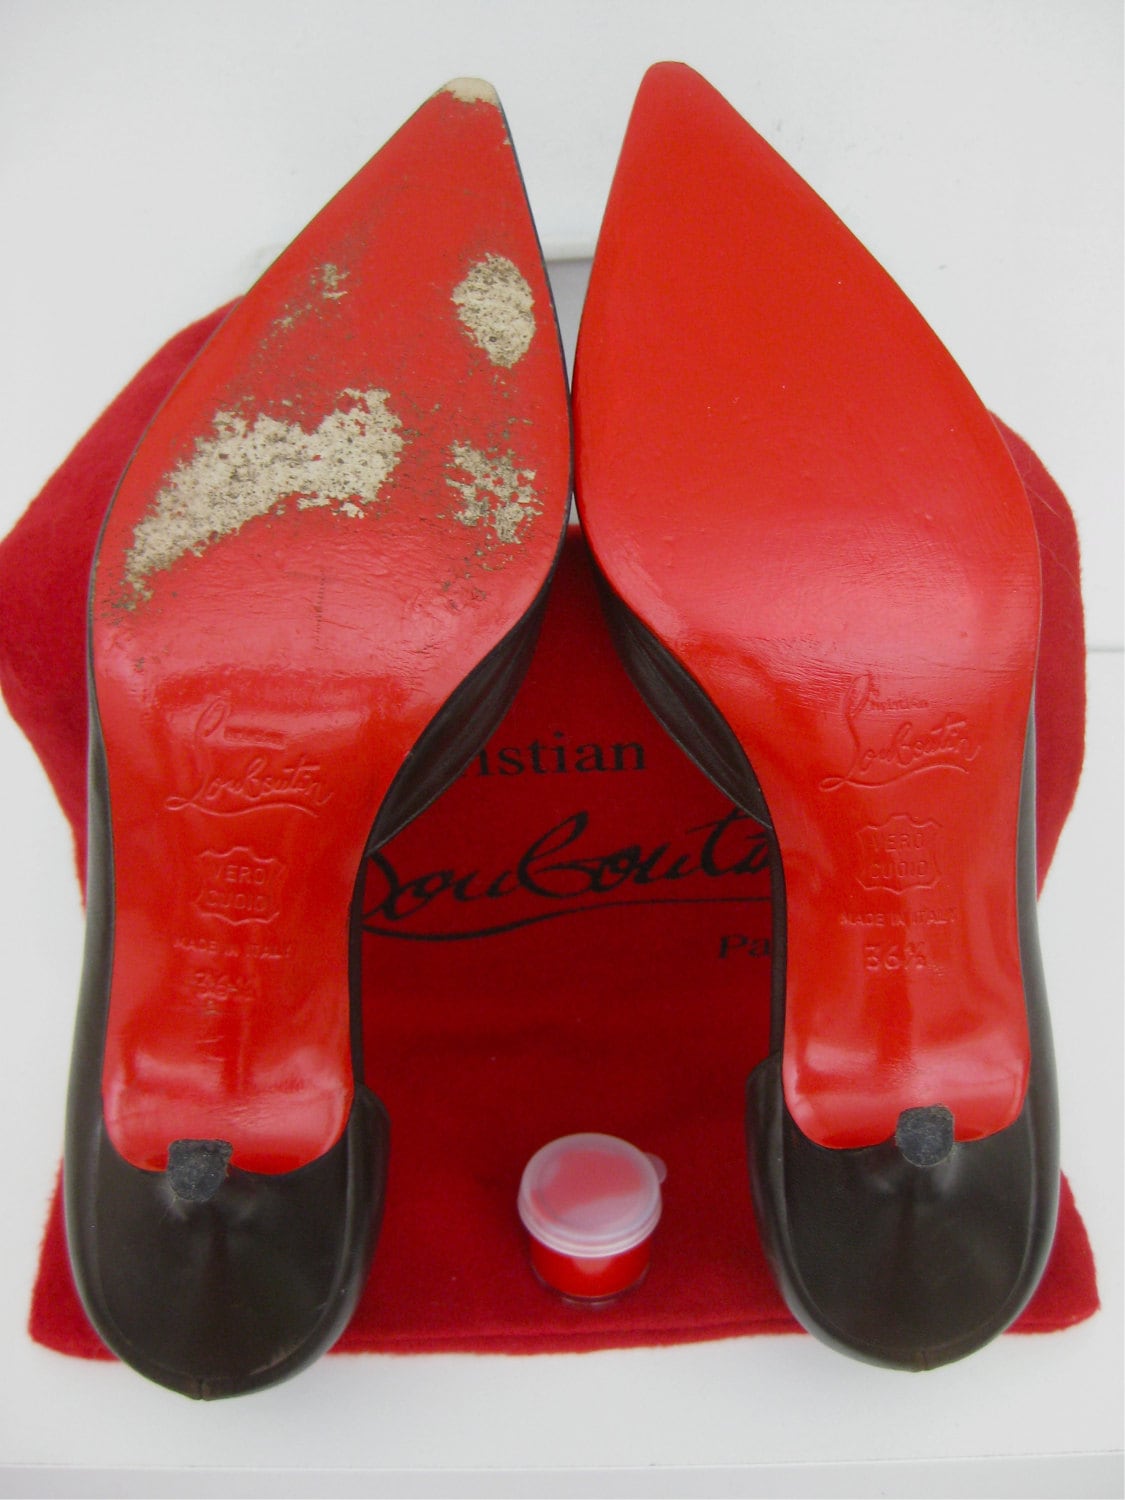  Red Rubber 100% Authentic Soles Replacement Good for Christian Louboutin  Shoes/heels 1mm Thin